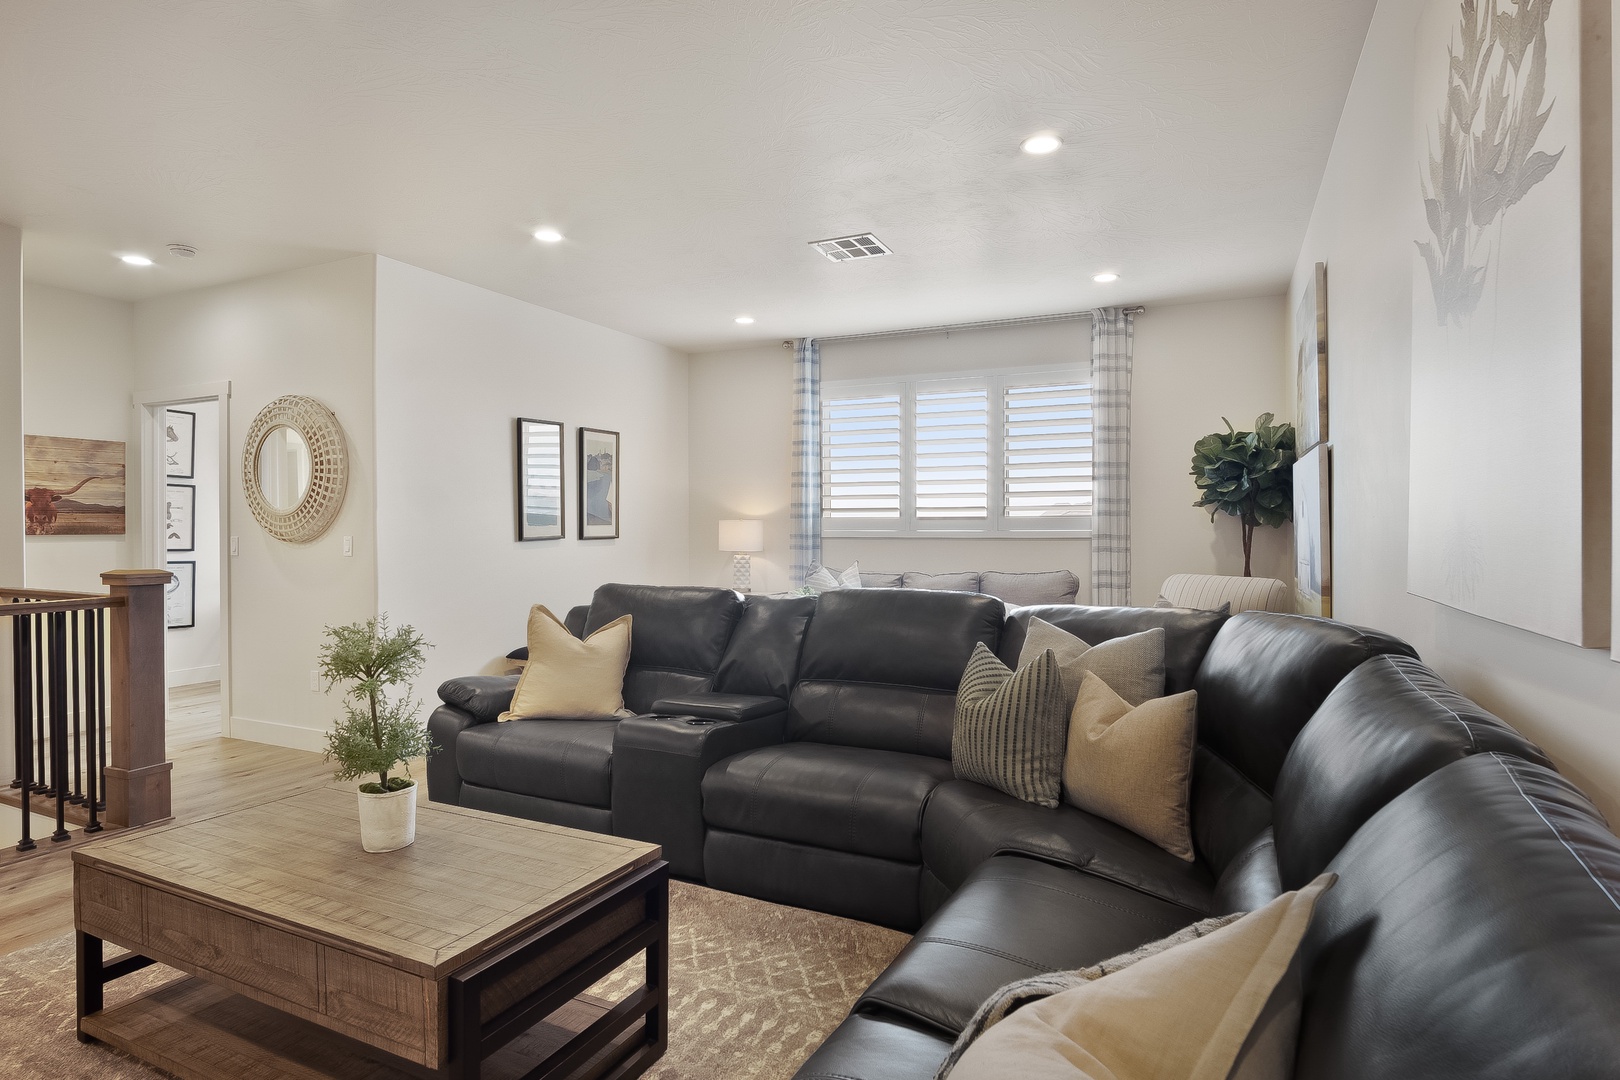 Ample seating for family and friends in the family room